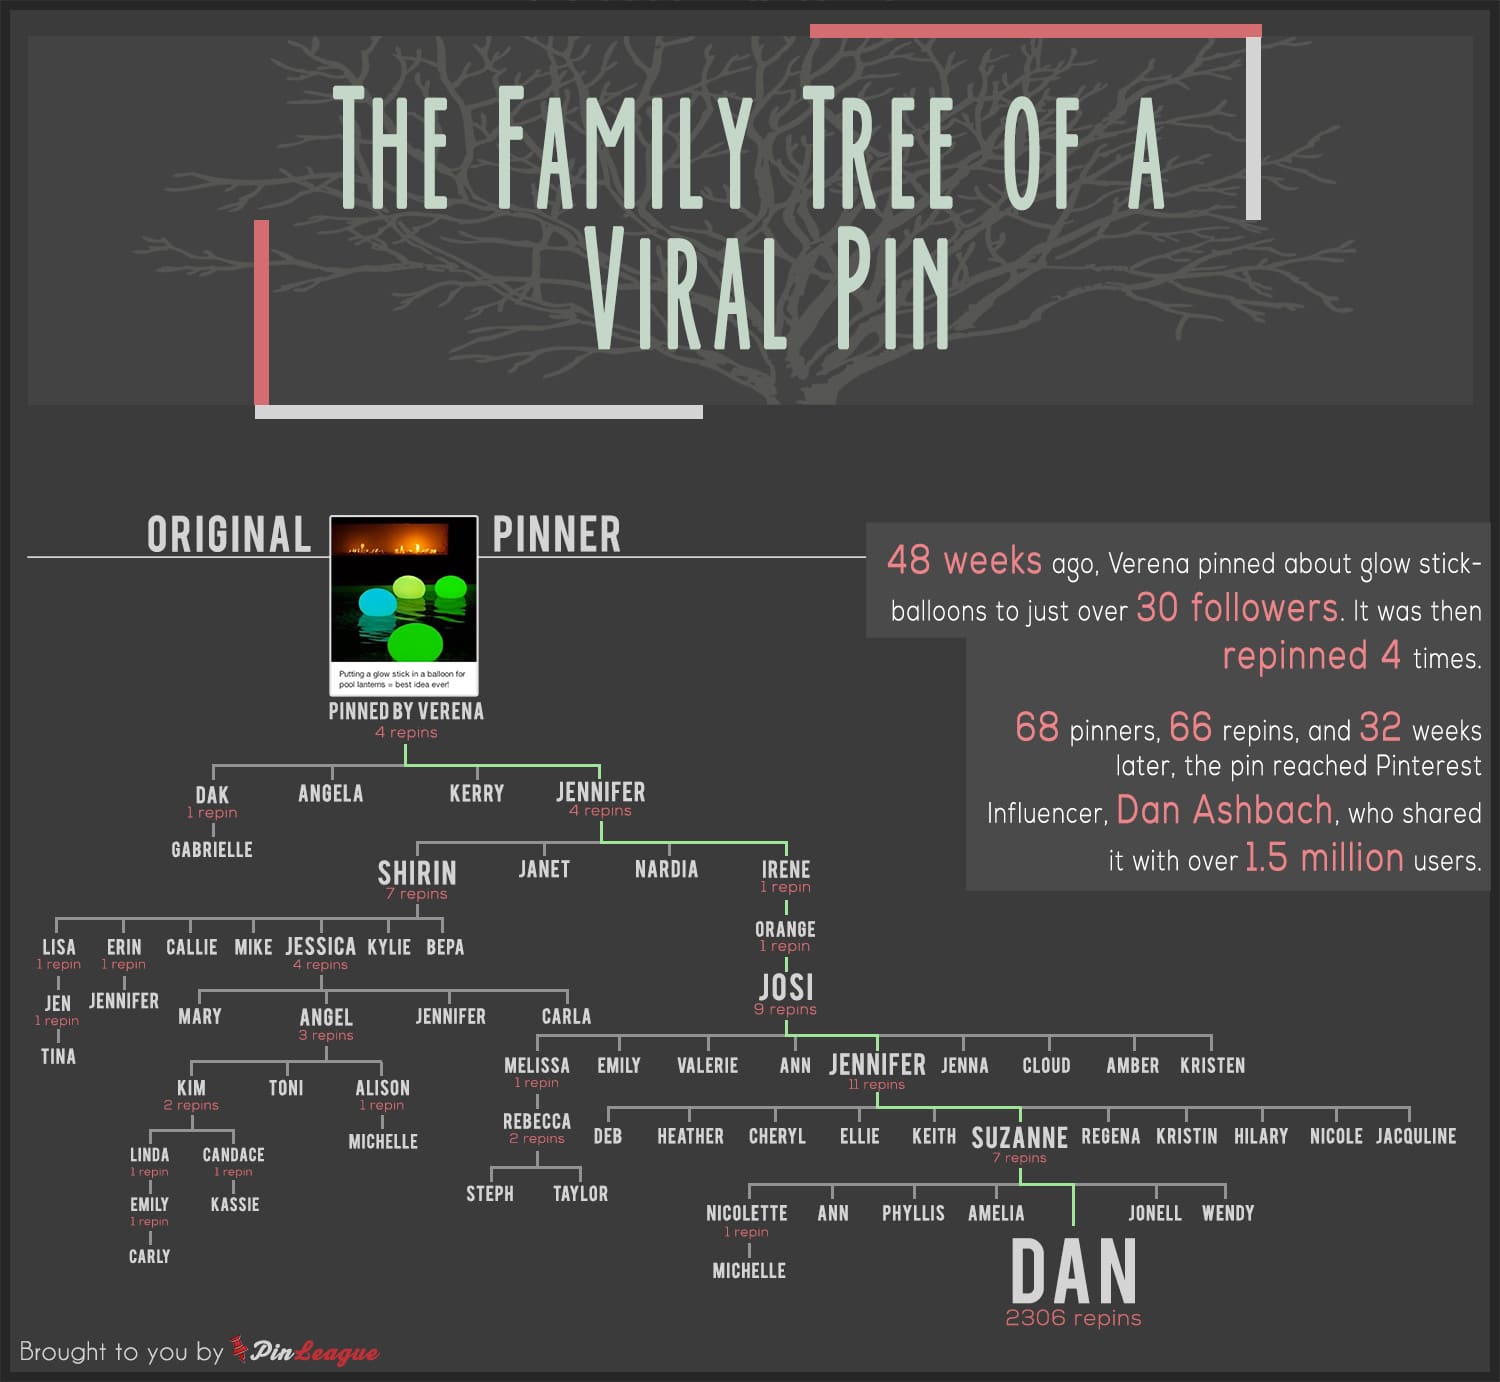 Lessons About Going Viral Learned From A Pin On Pinterest [Chart]